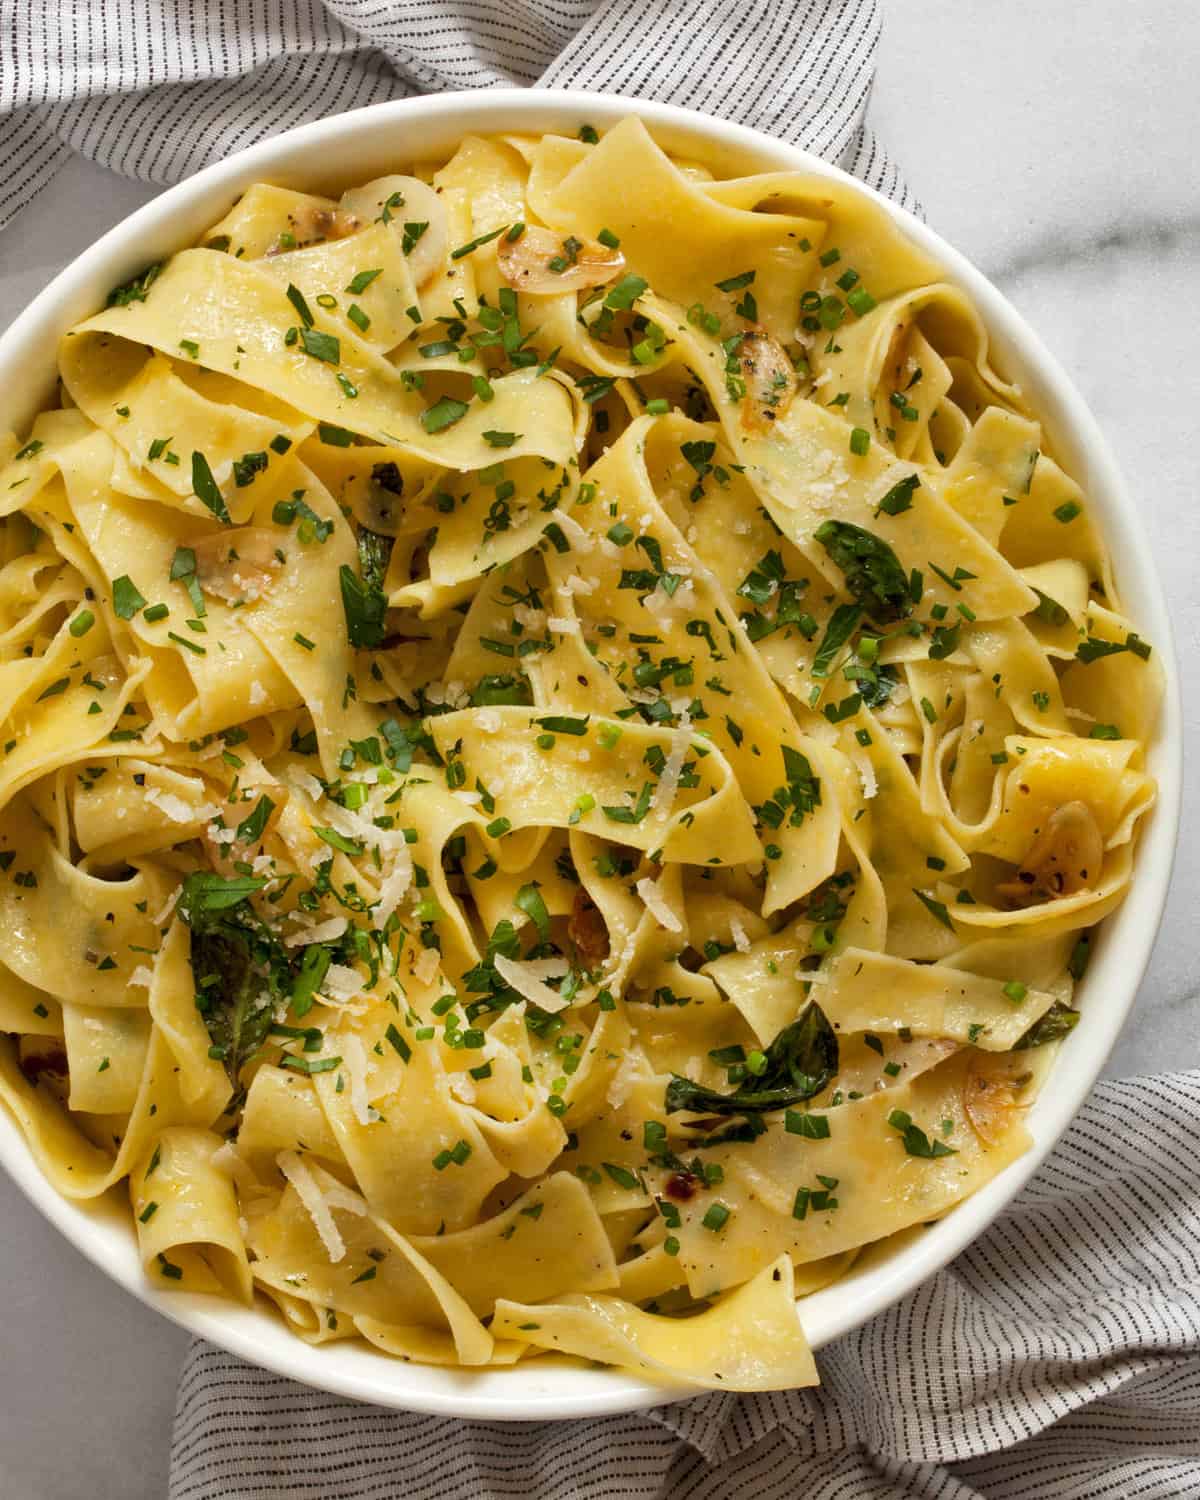 Pappardelle pasta with herbs in a bowl.